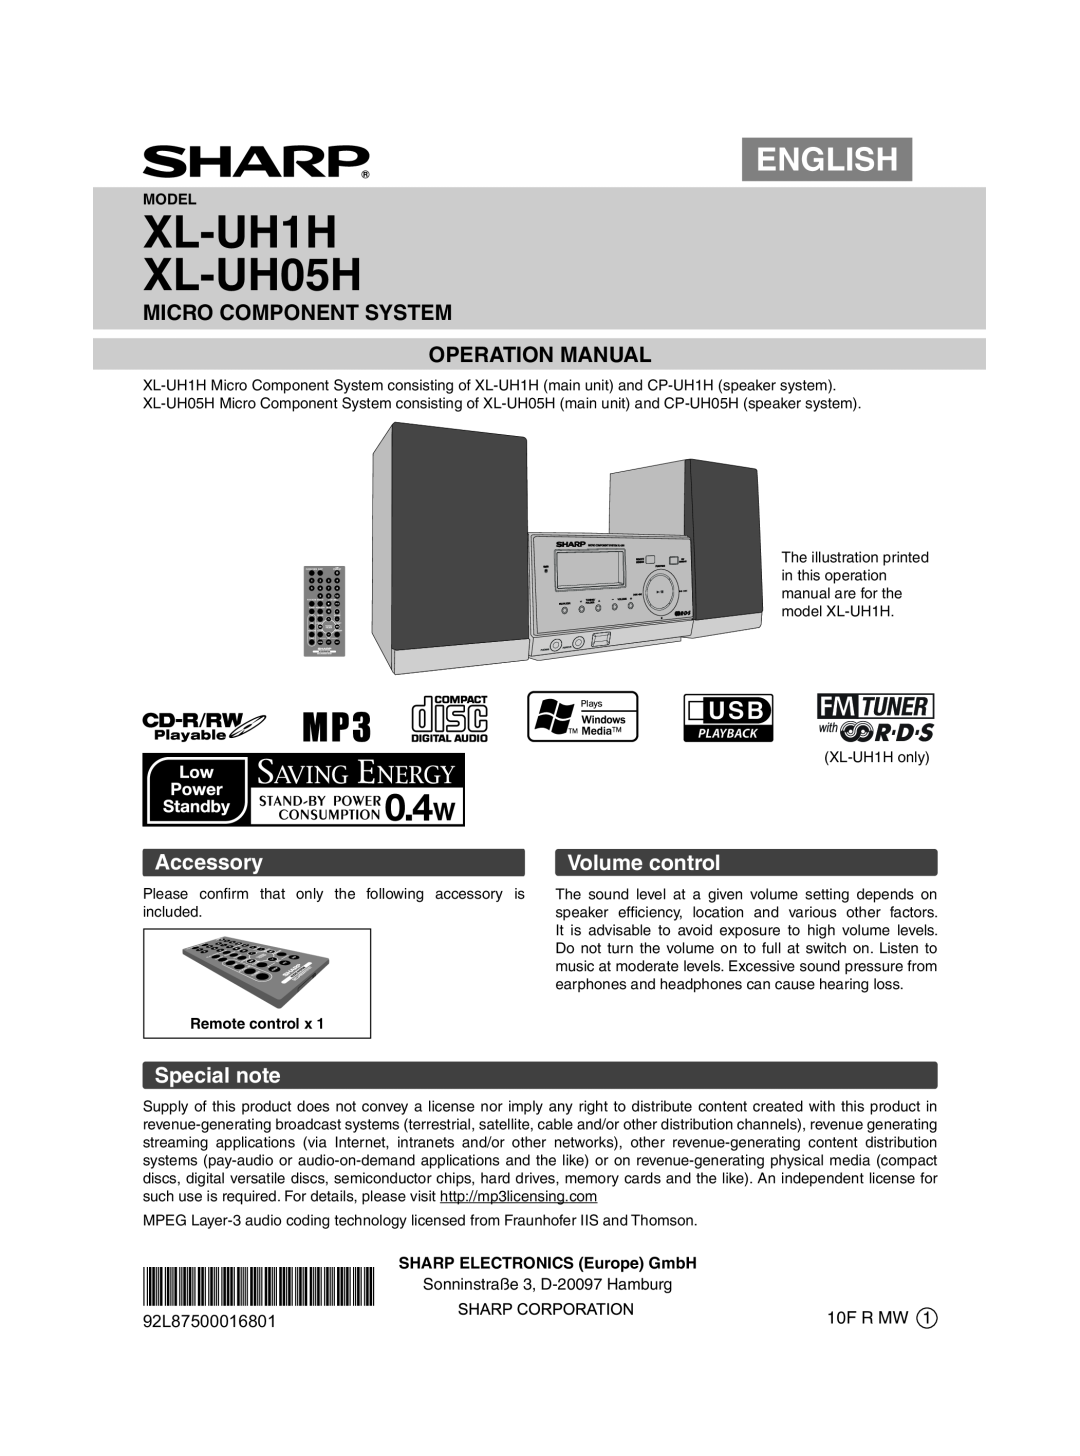 Sharp operation manual Accessory, Volume control, Special note, XL-UH1H XL-UH05H, English, 92L87500016801, 10F R MW 